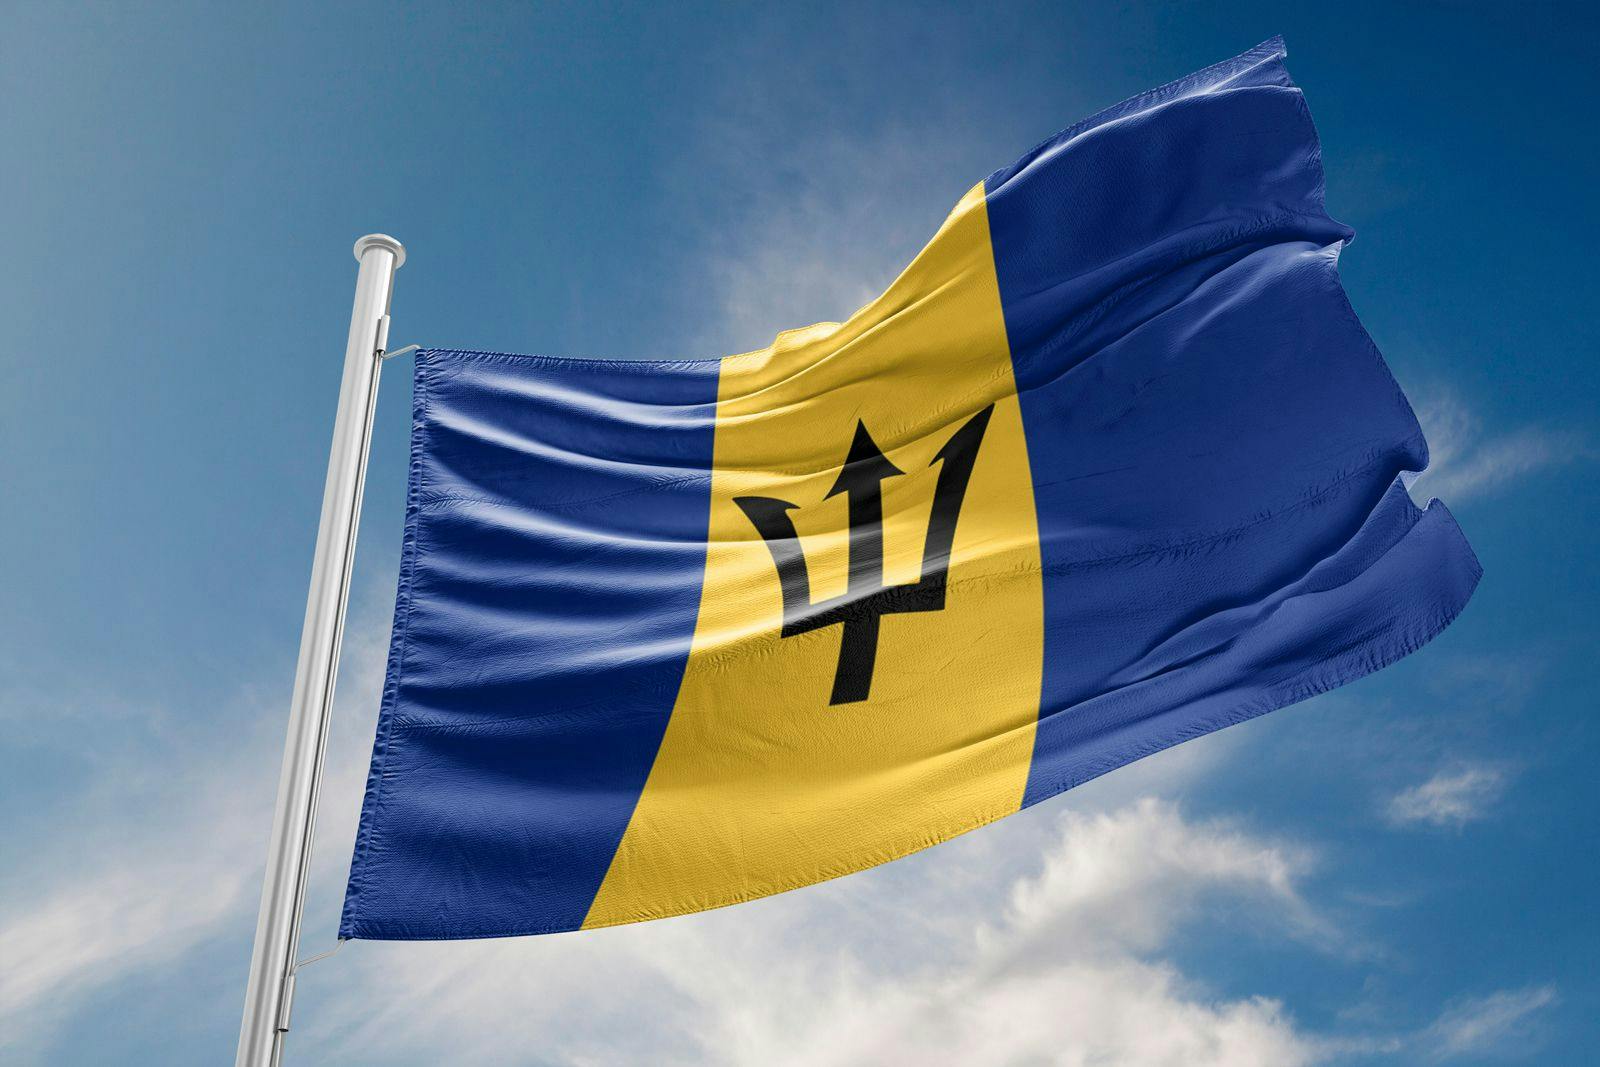 Barbados flag colored blue and yellow with a trident in the center